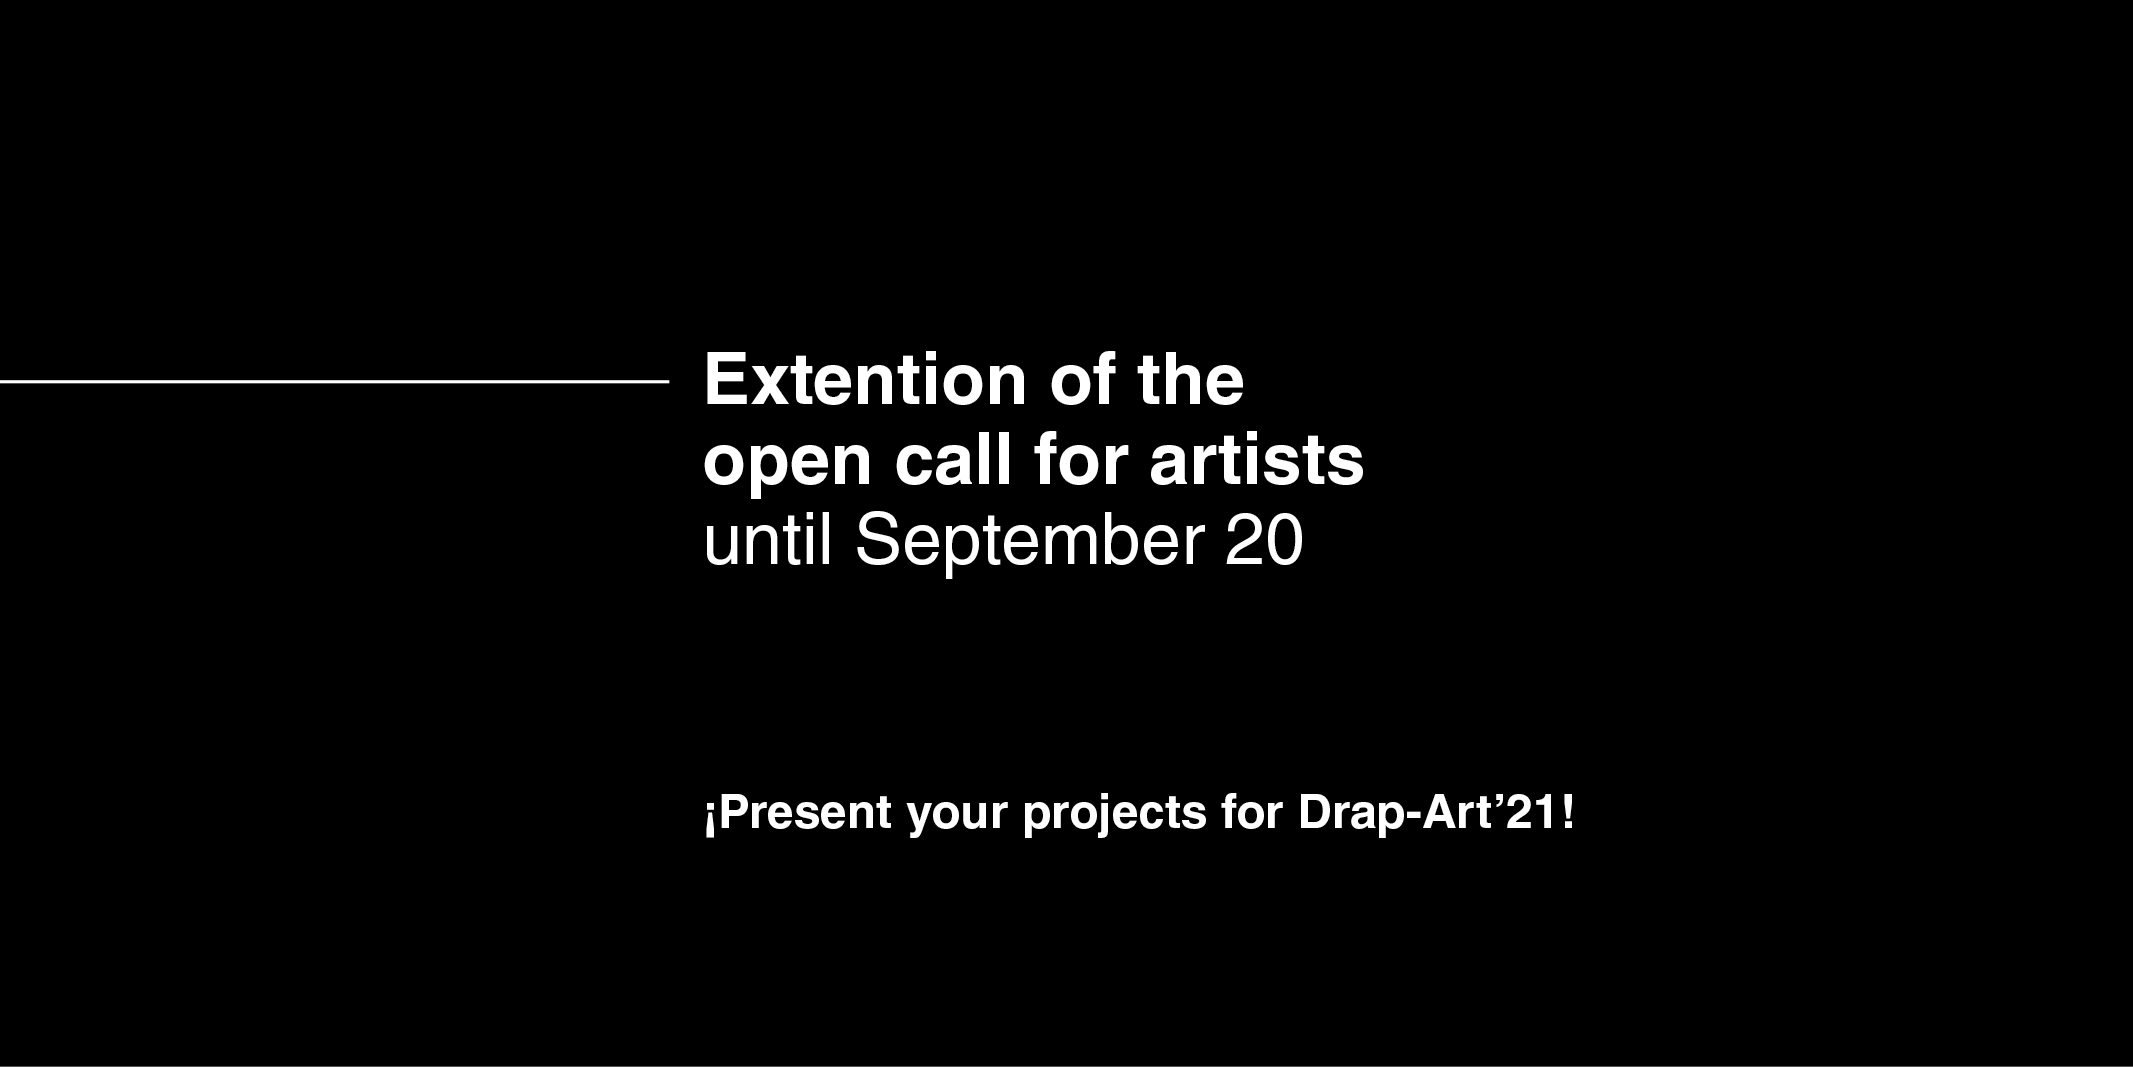 DrapArt'21 – Extension call for artists